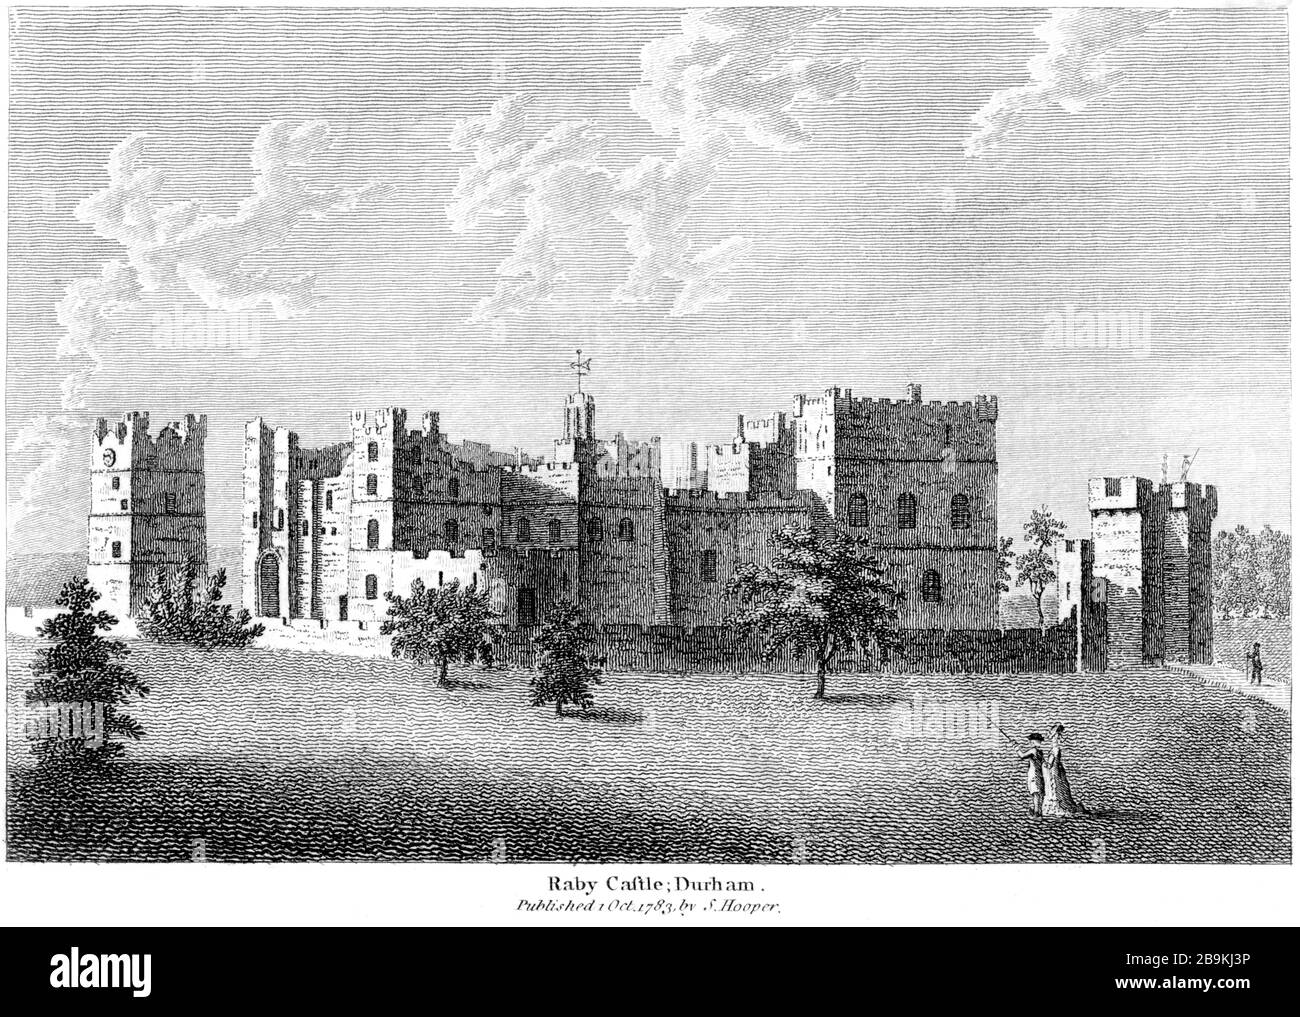 An engraving of Raby Castle Durham 1783 scanned at high res from a book published around 1786. This image is believed to be free of all copyright. Stock Photo